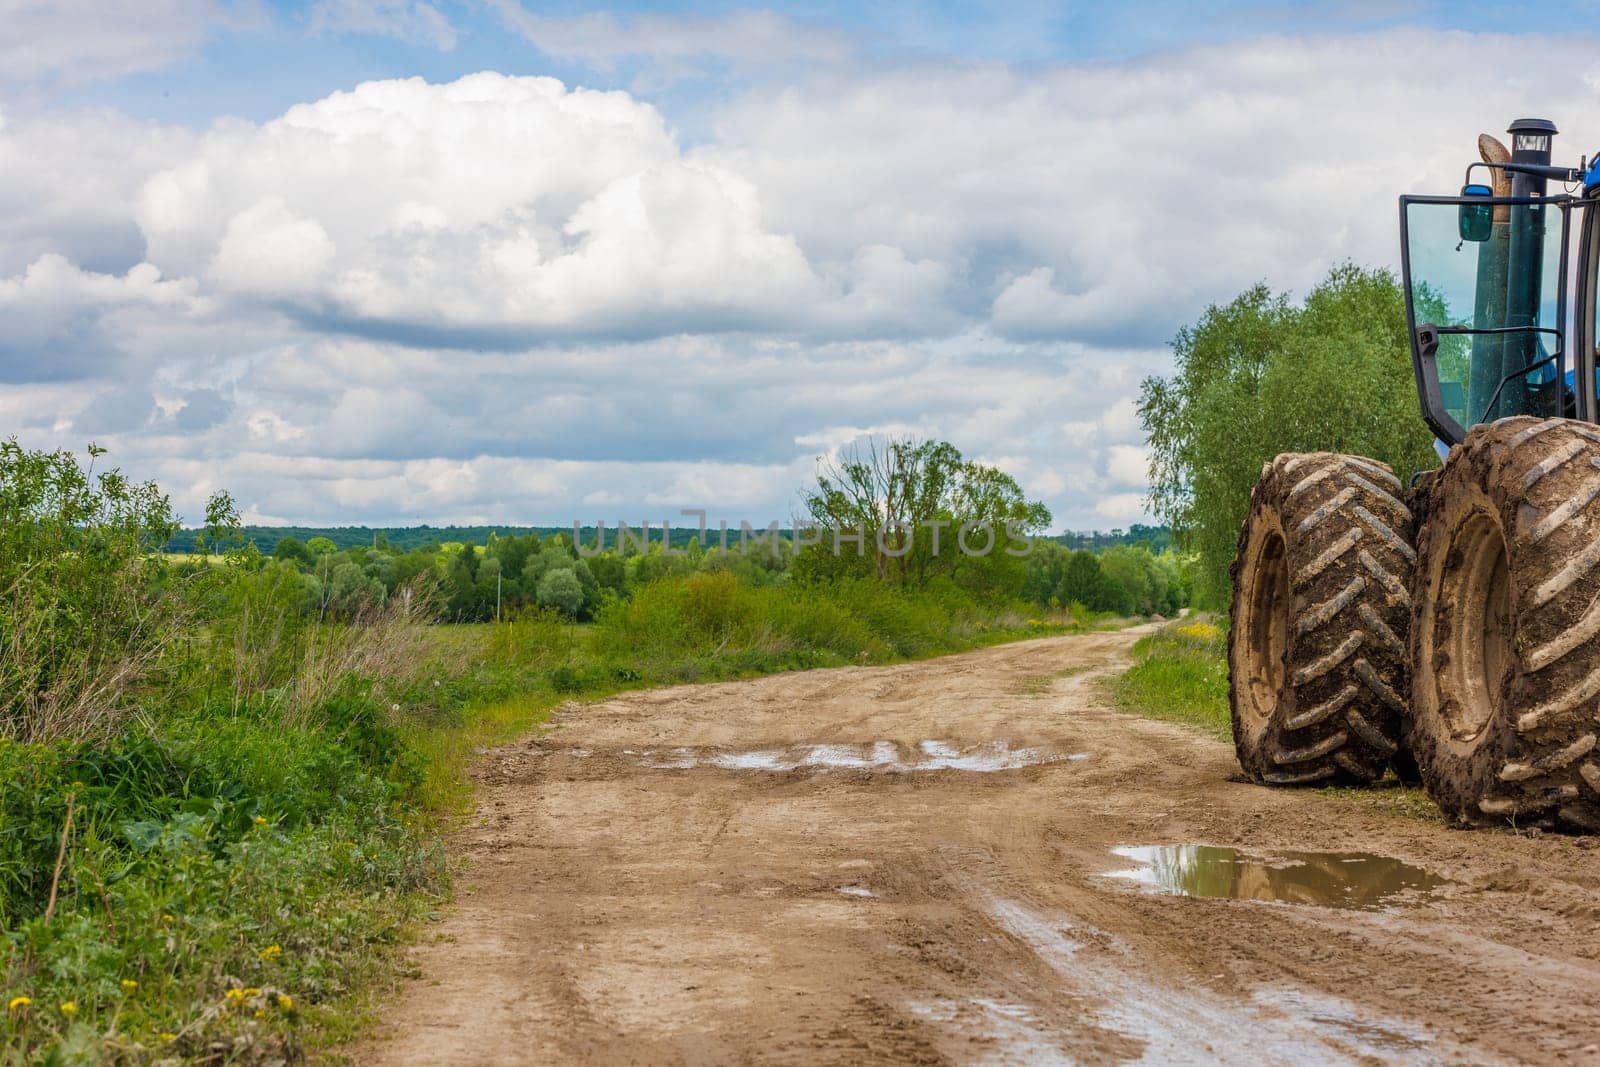 Tractor with large wheels on the edge of a dirt road at summer day with cloudy sky. by z1b